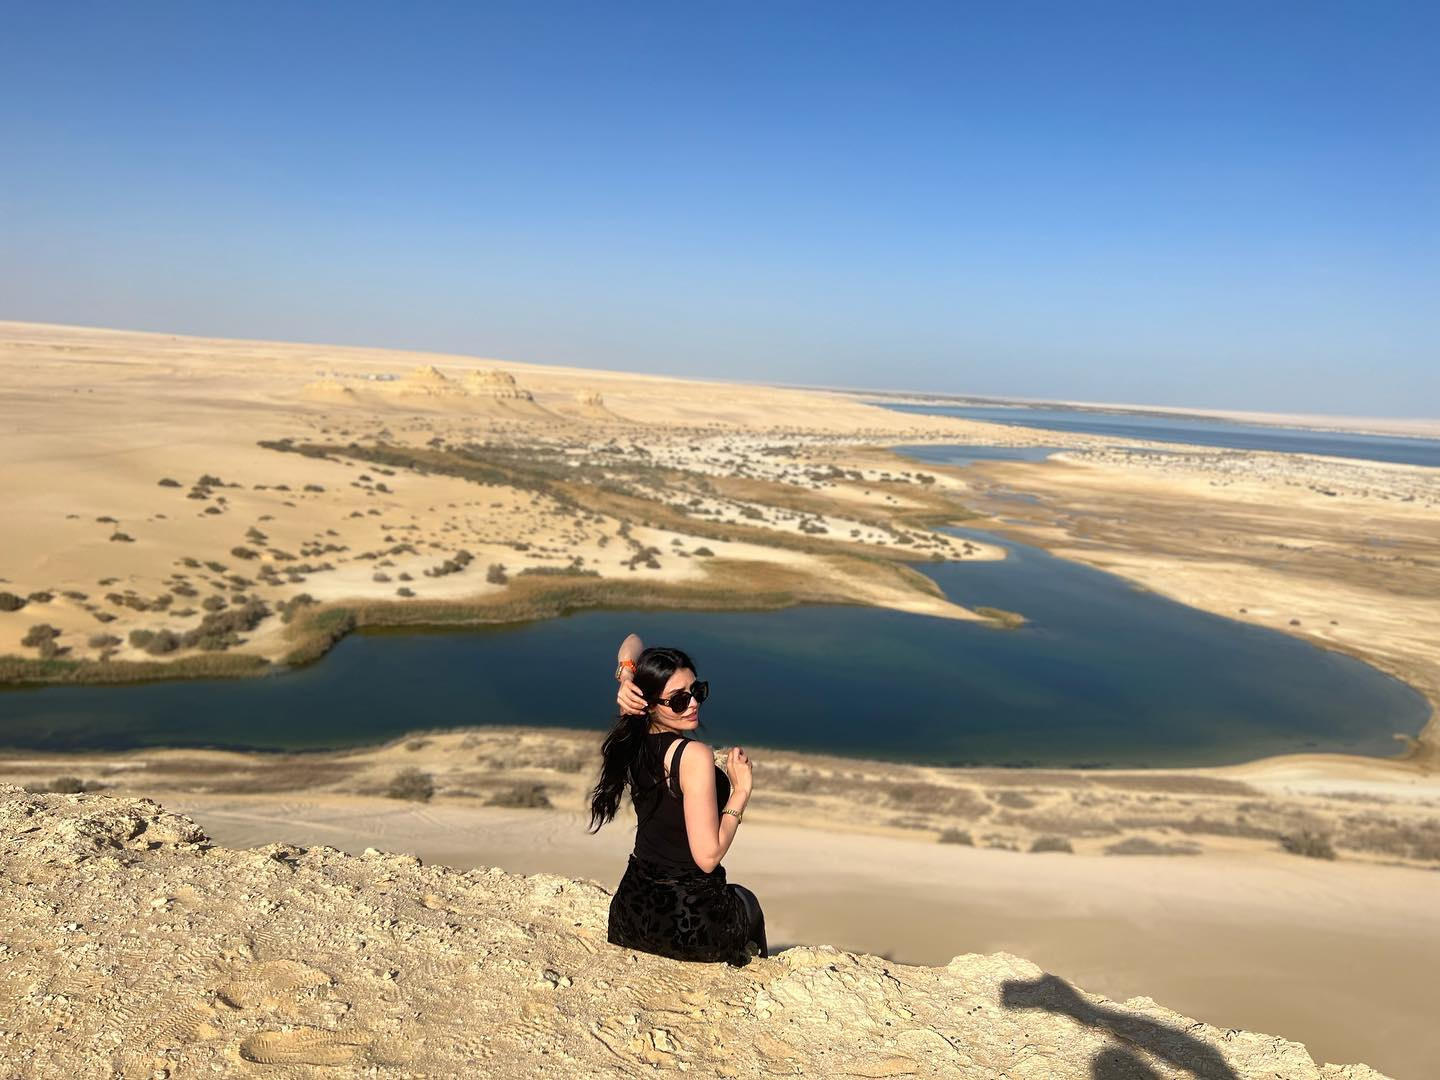 2 Day trip to wadi el Hitan in Fayoum from Cairo